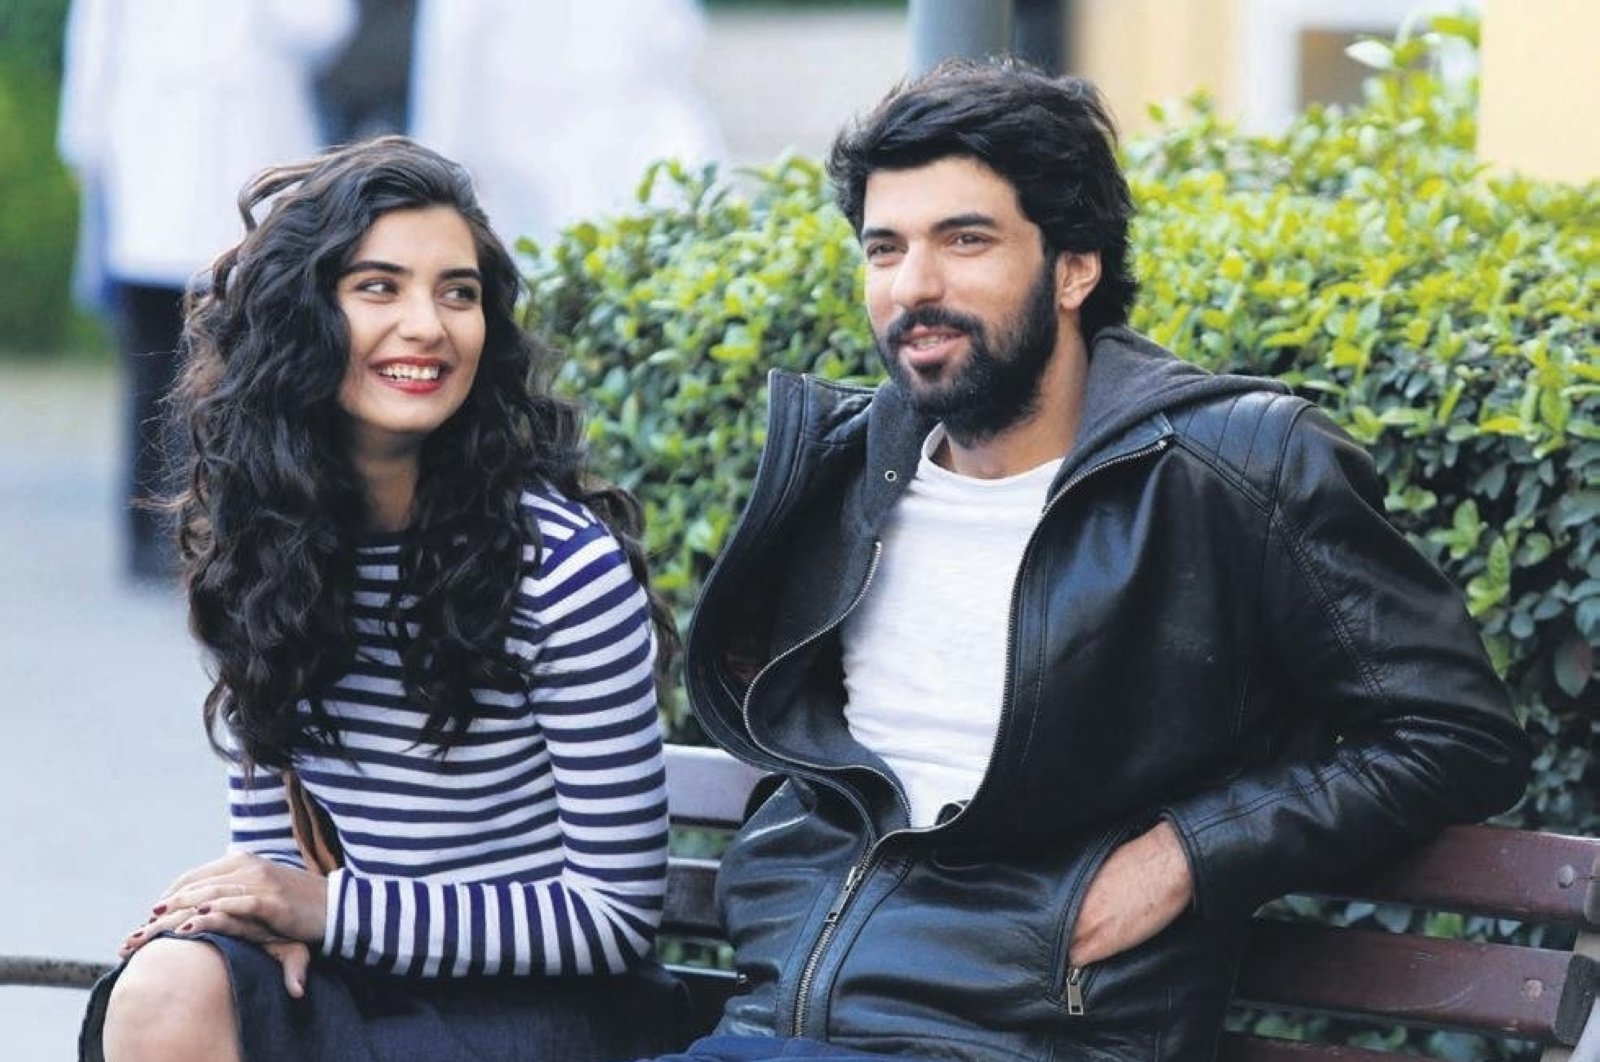 How Turkish TV series helped bridge a family divide | Daily Sabah